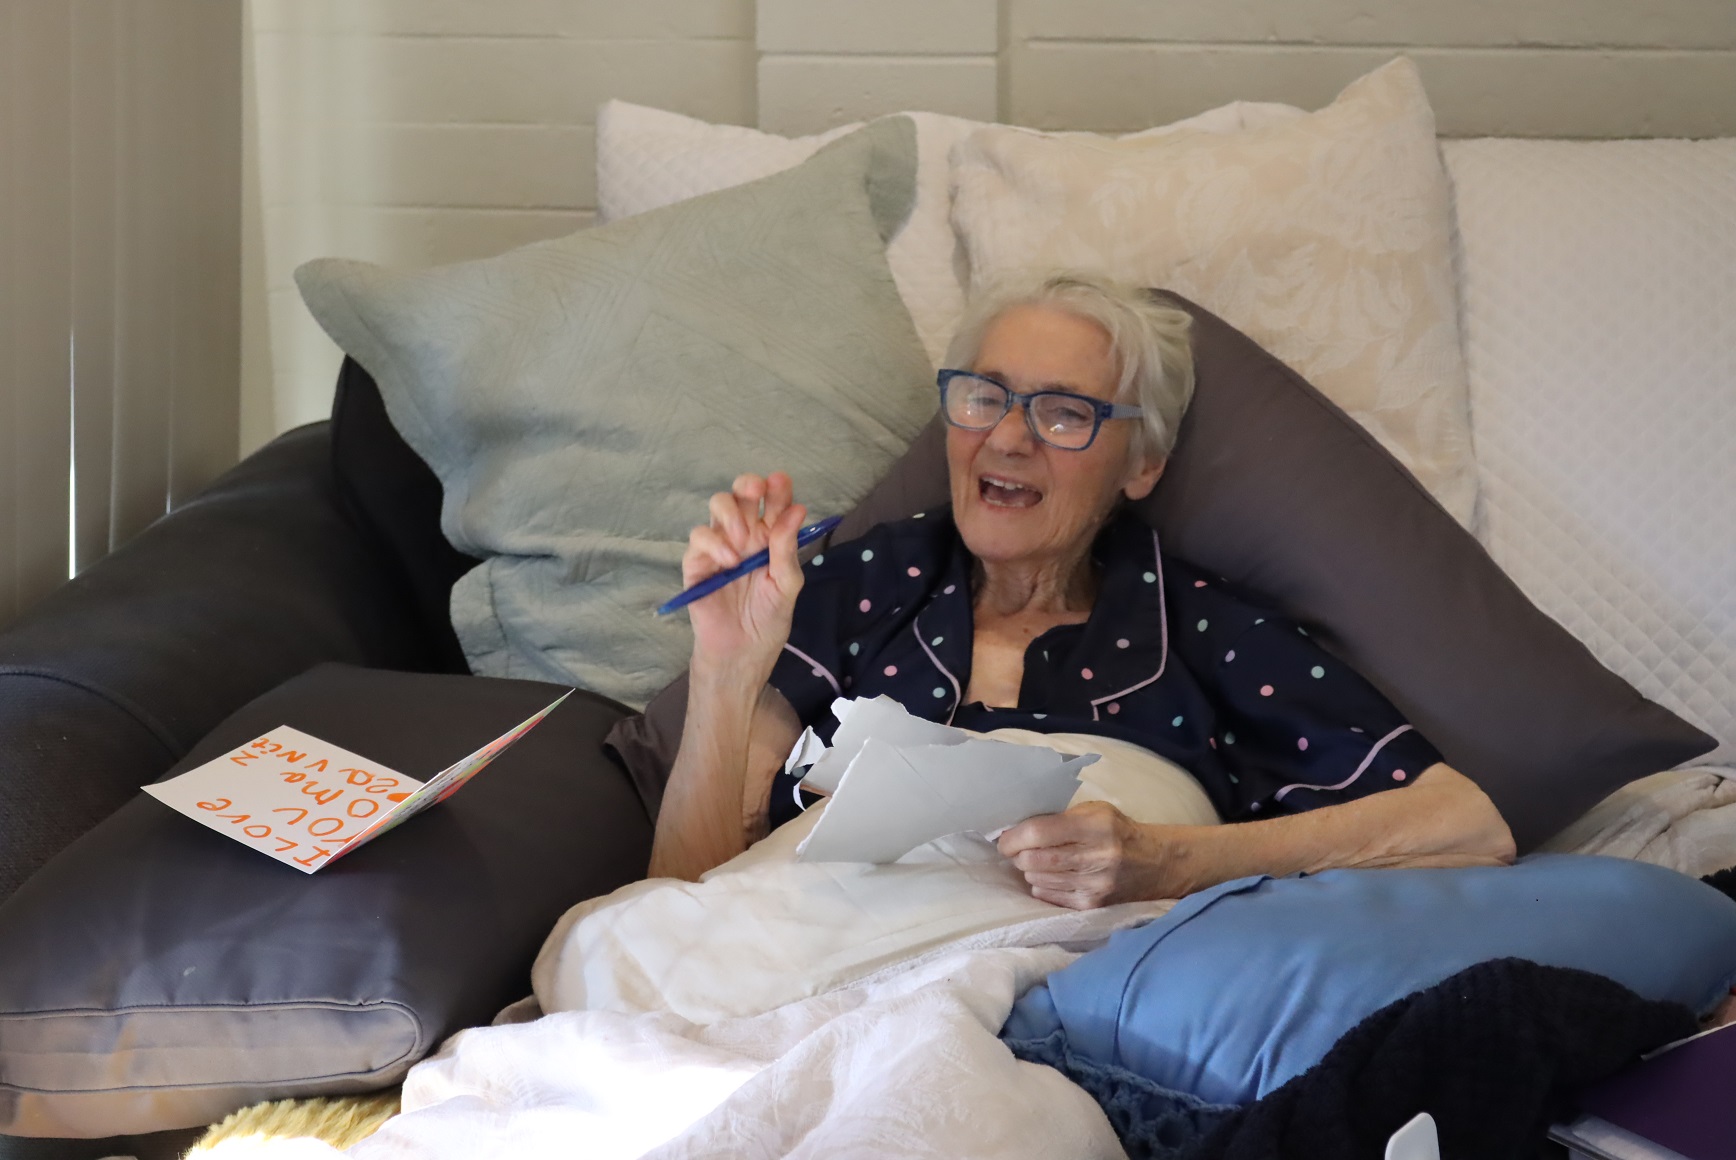 palliative client at home in bed sings as part of music therapy session